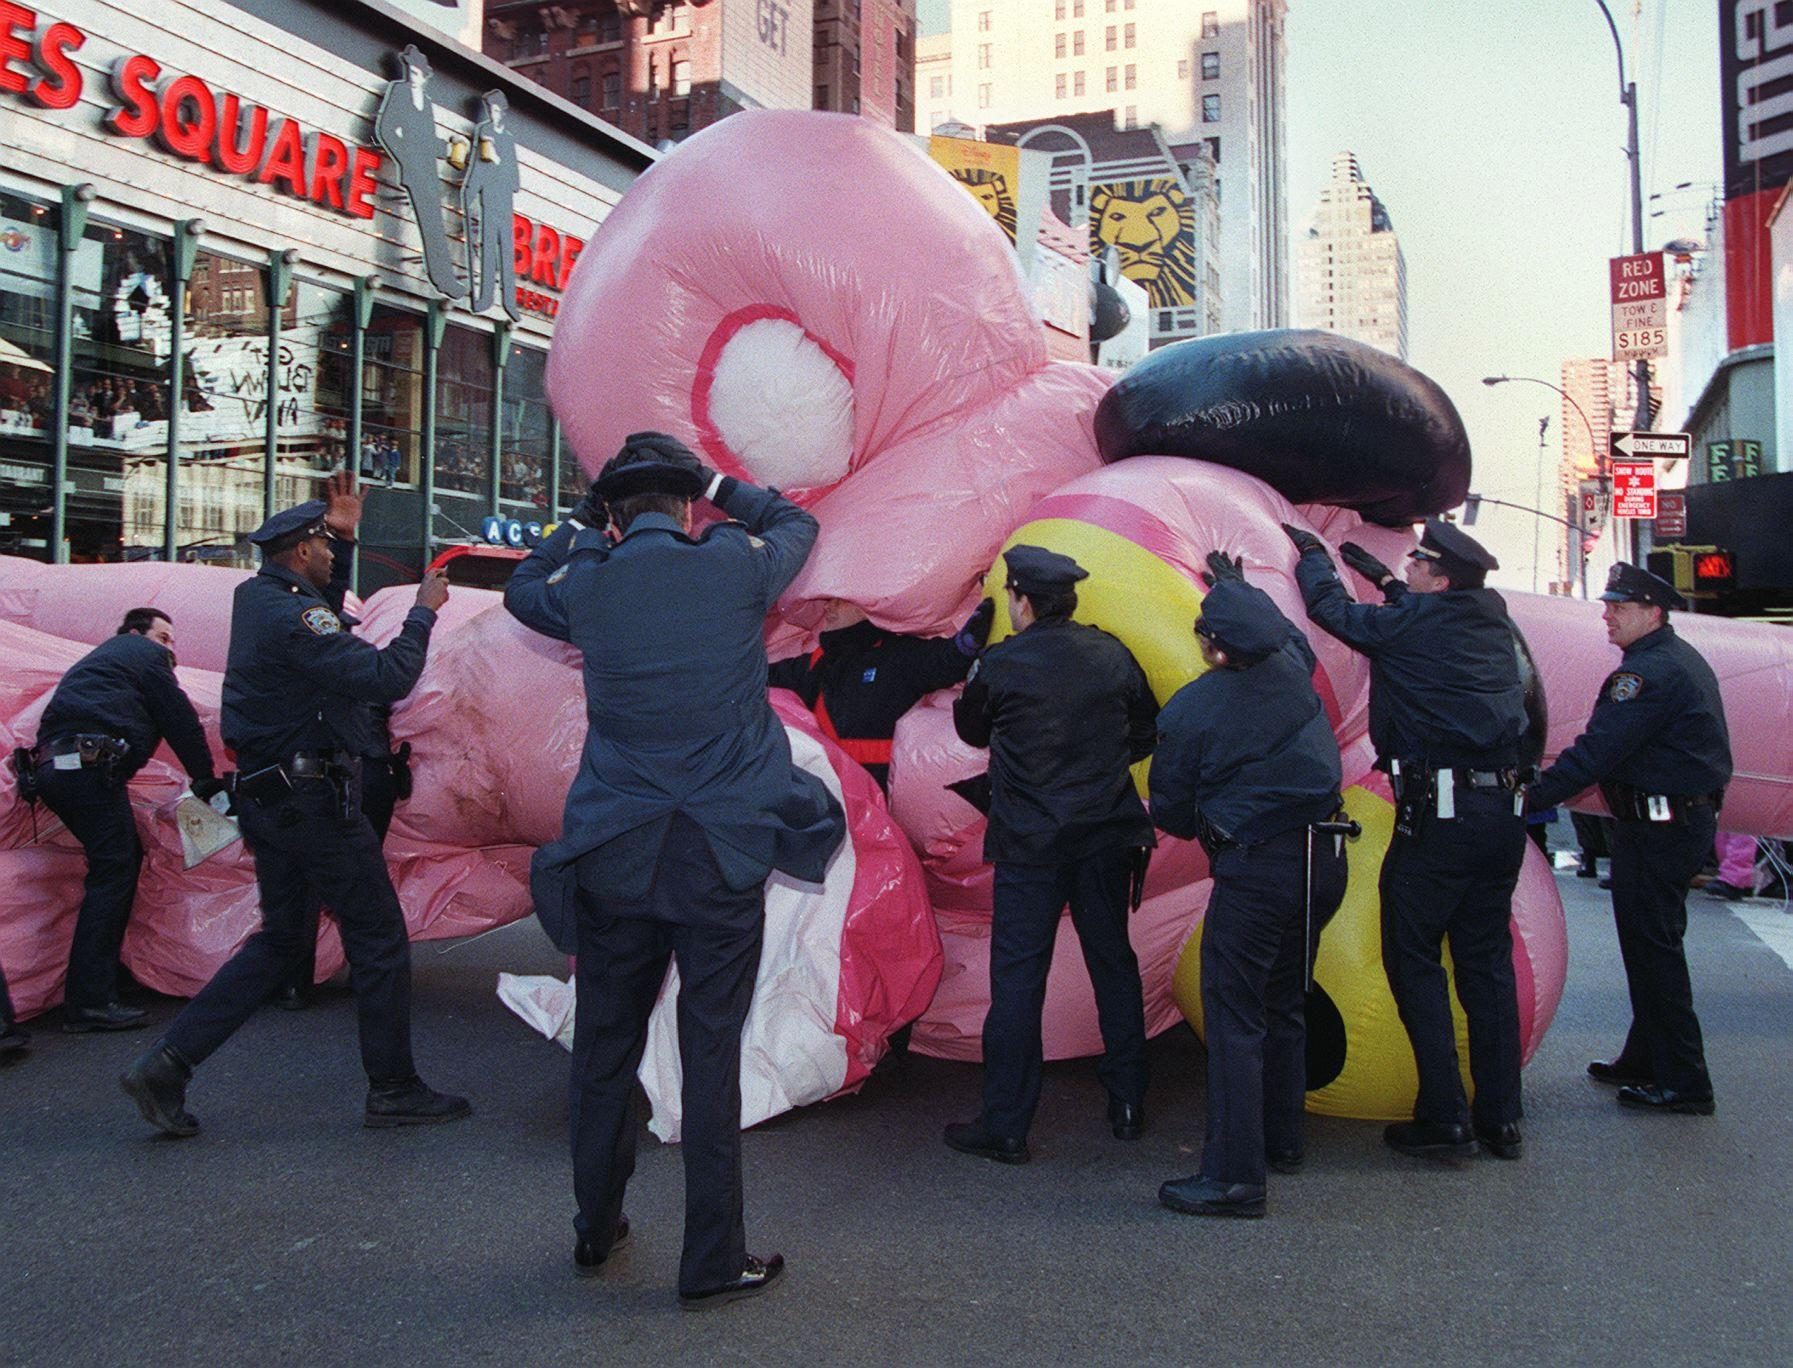 New York City Police rush to the aid of the Pink Panther balloon as it collapses after being blown over due to high winds 27 November at the 71st annual Macy's Thanksgiving day parade in New York.